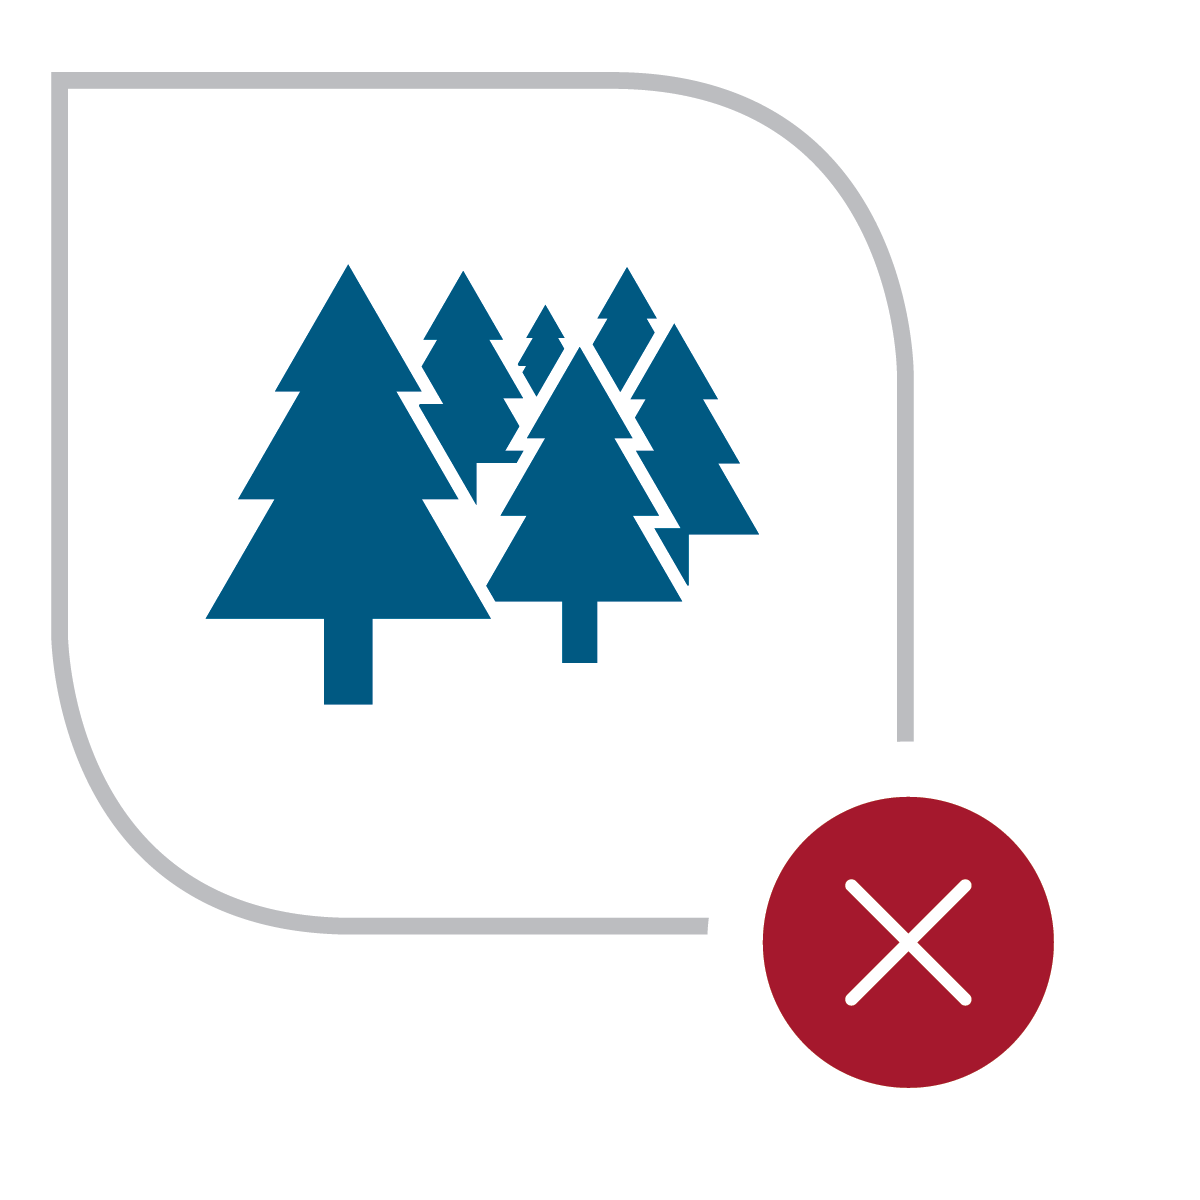 An icon of a forest, with a red X in the bottom right corner